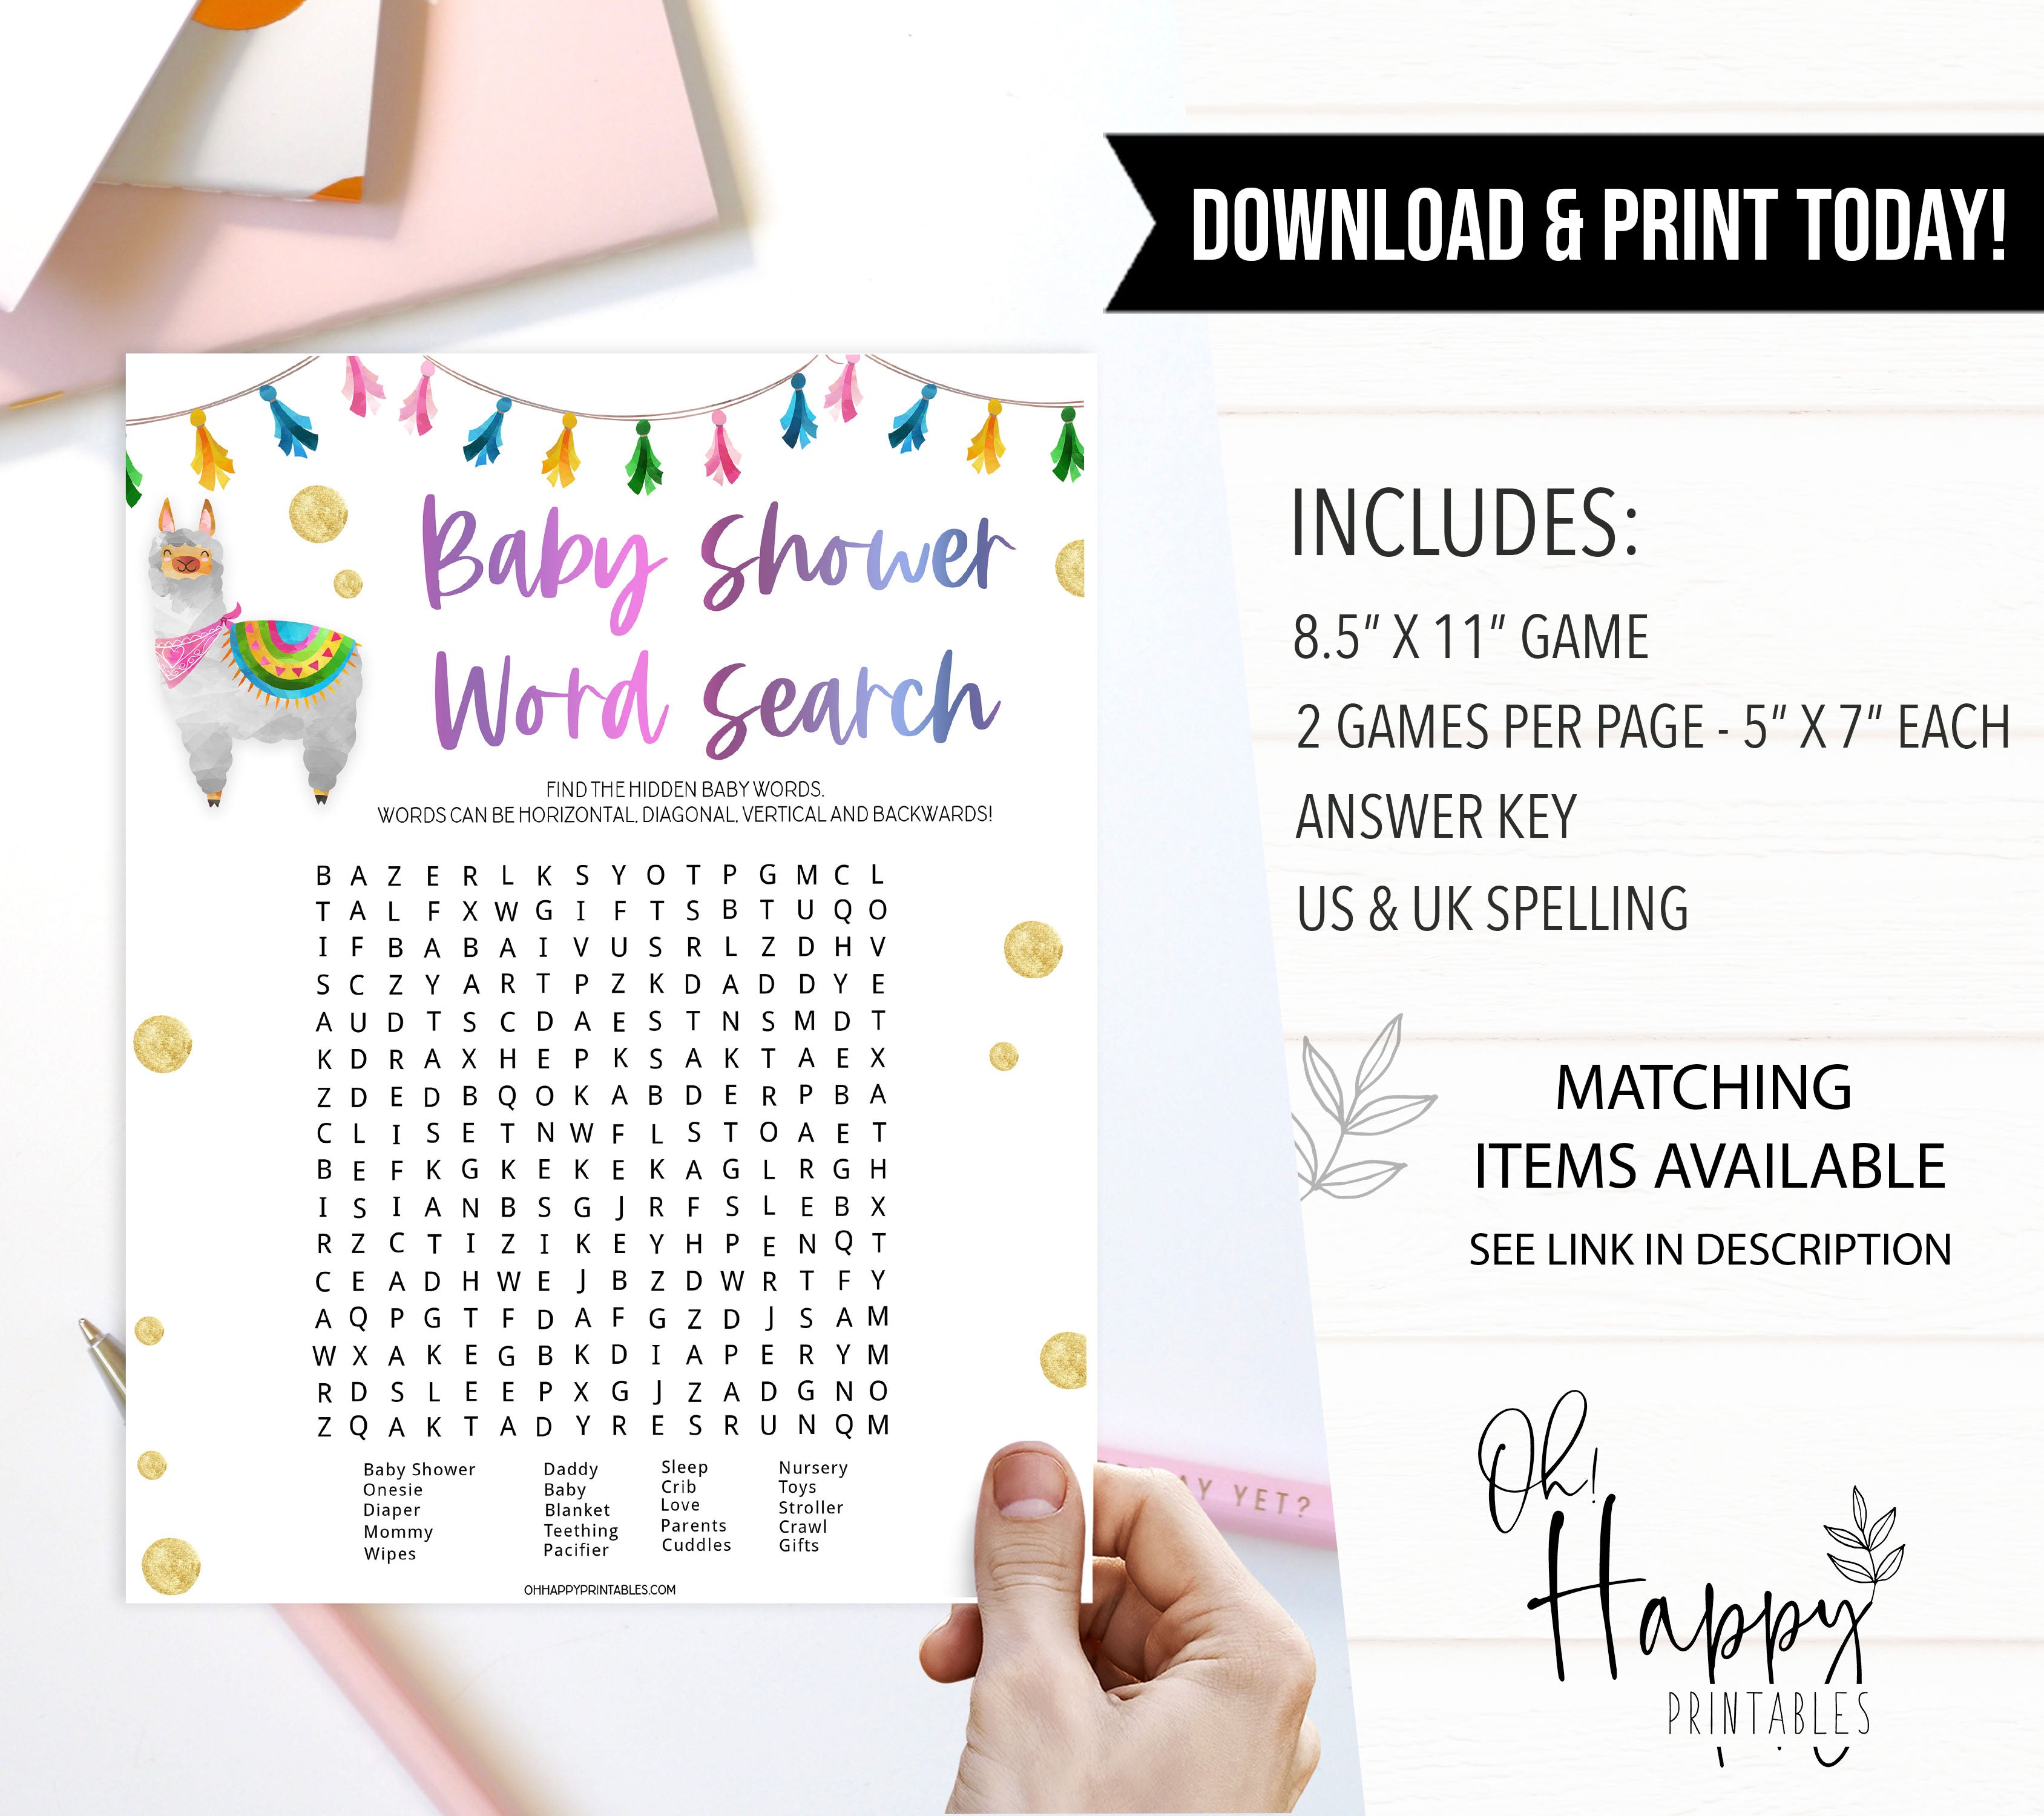 baby word search game, baby shower word search game, Printable baby shower games, llama fiesta fun baby games, baby shower games, fun baby shower ideas, top baby shower ideas, Llama fiesta shower baby shower, fiesta baby shower ideas